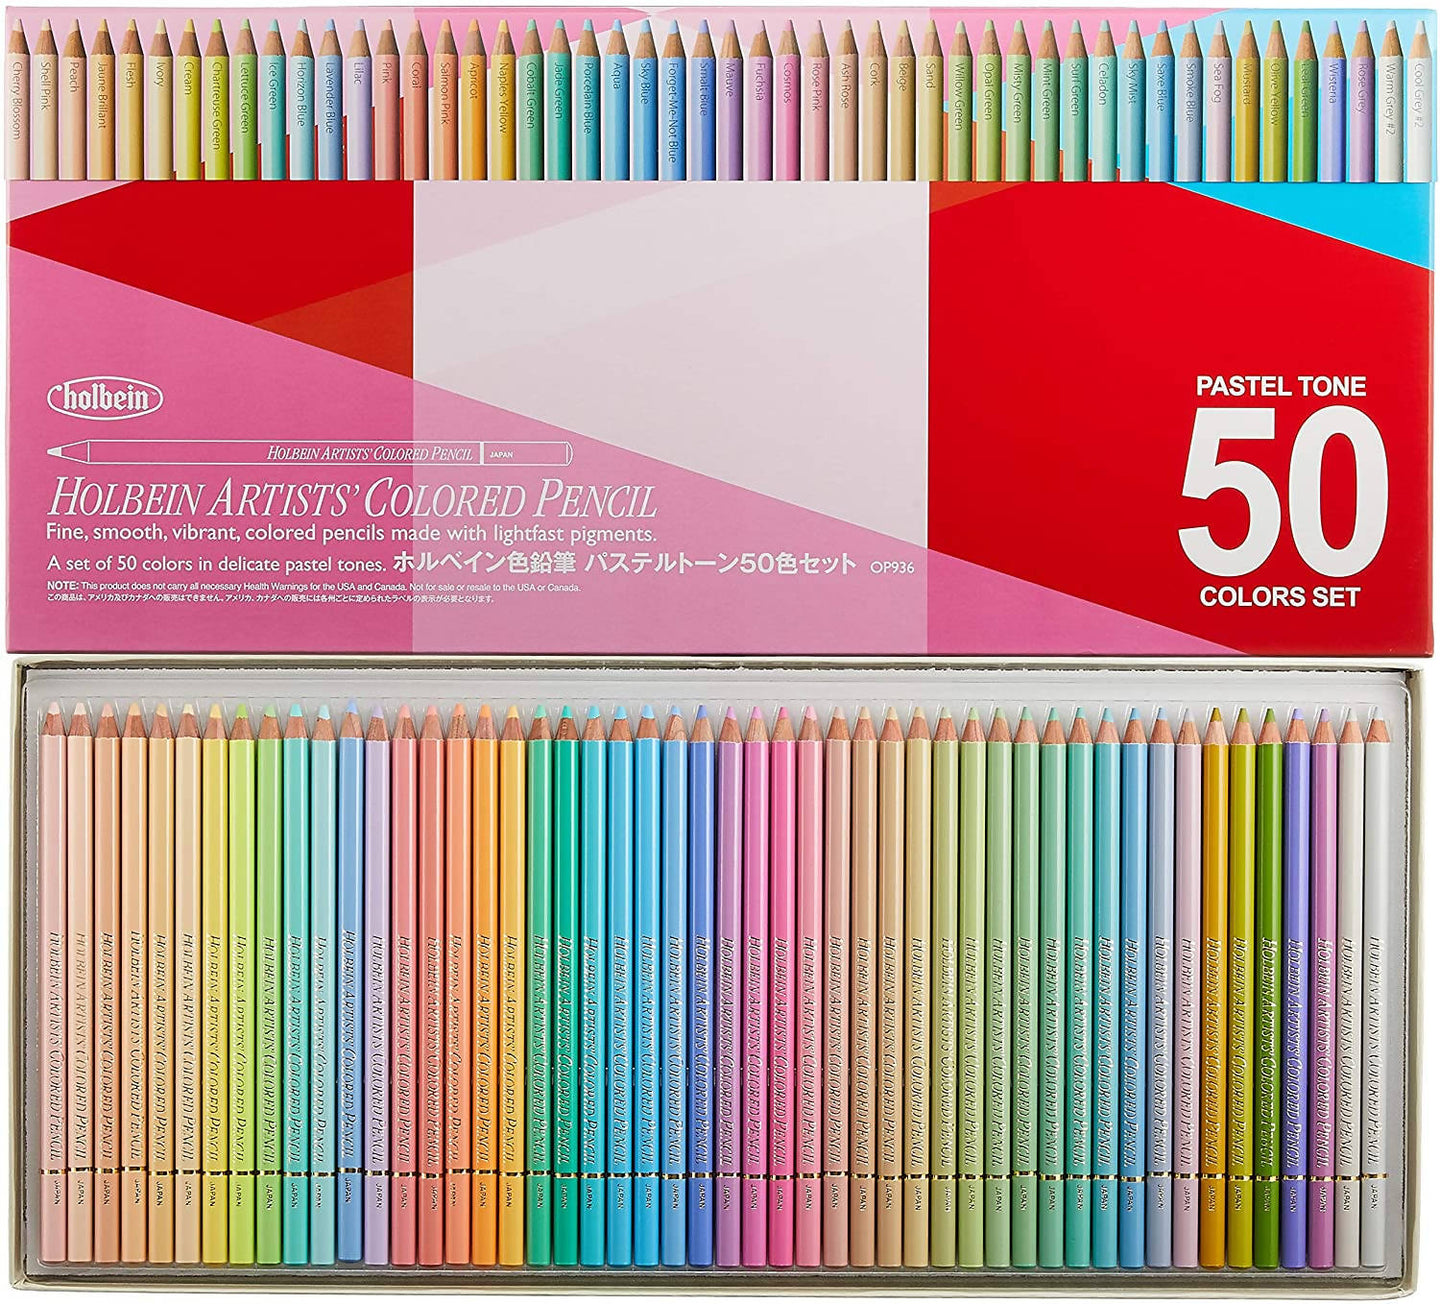 HOLBEIN Artists’ Colored Pencils – 50 Color Pastel Tone Set 20936